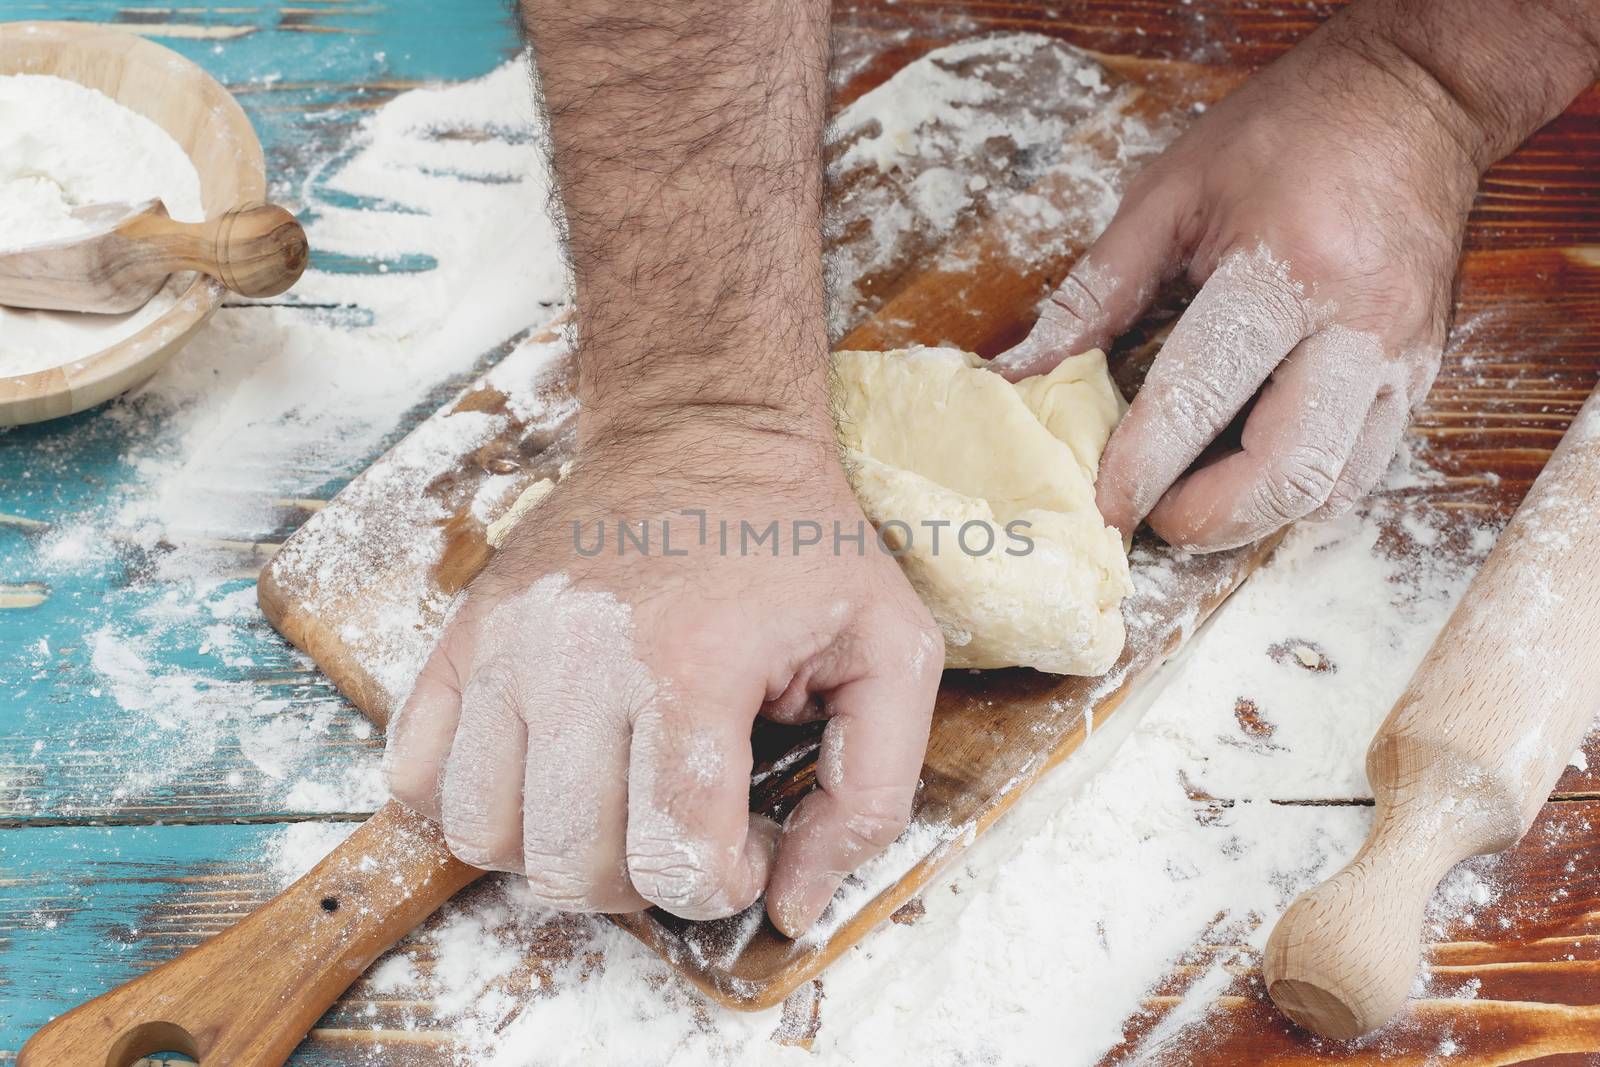 Hands of a man kneading dough for home made pizza